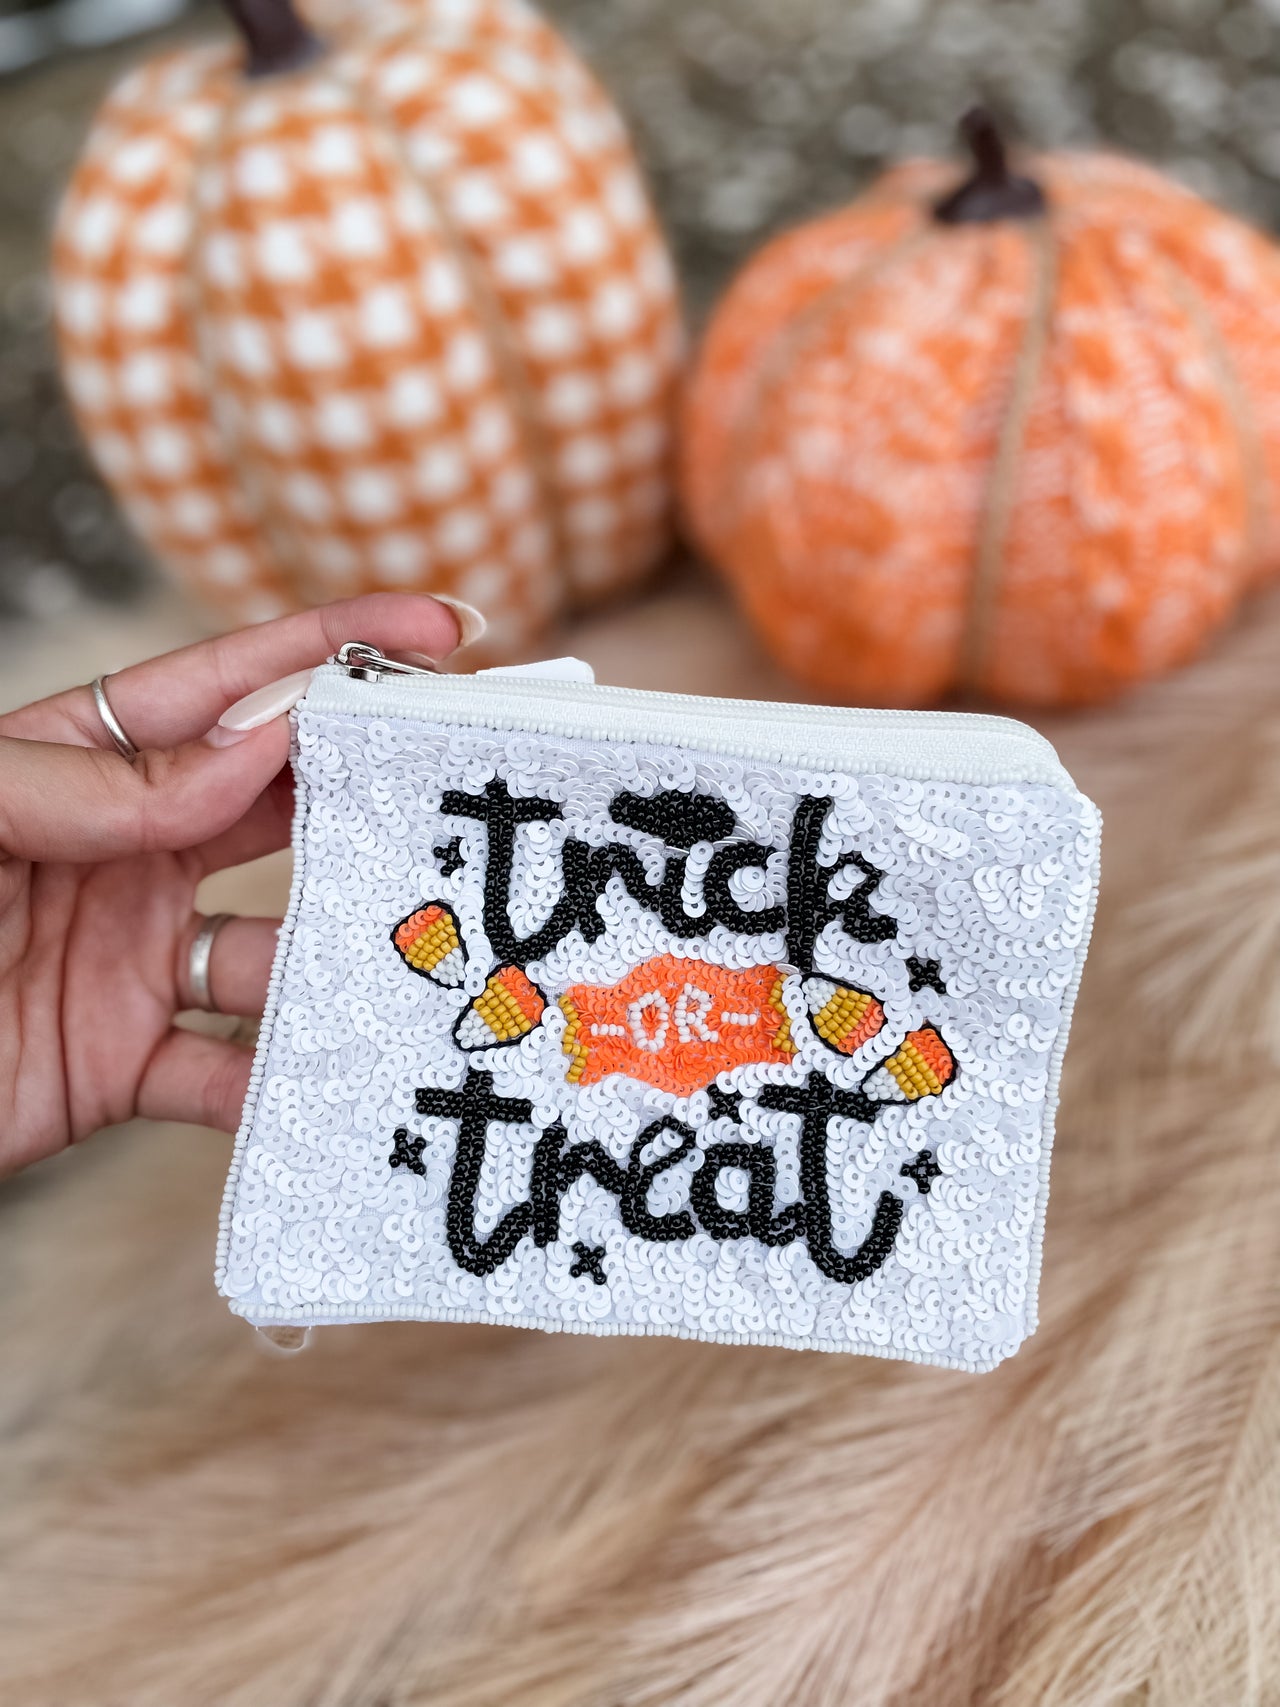 Sequin "Trick or Treat" Pouch